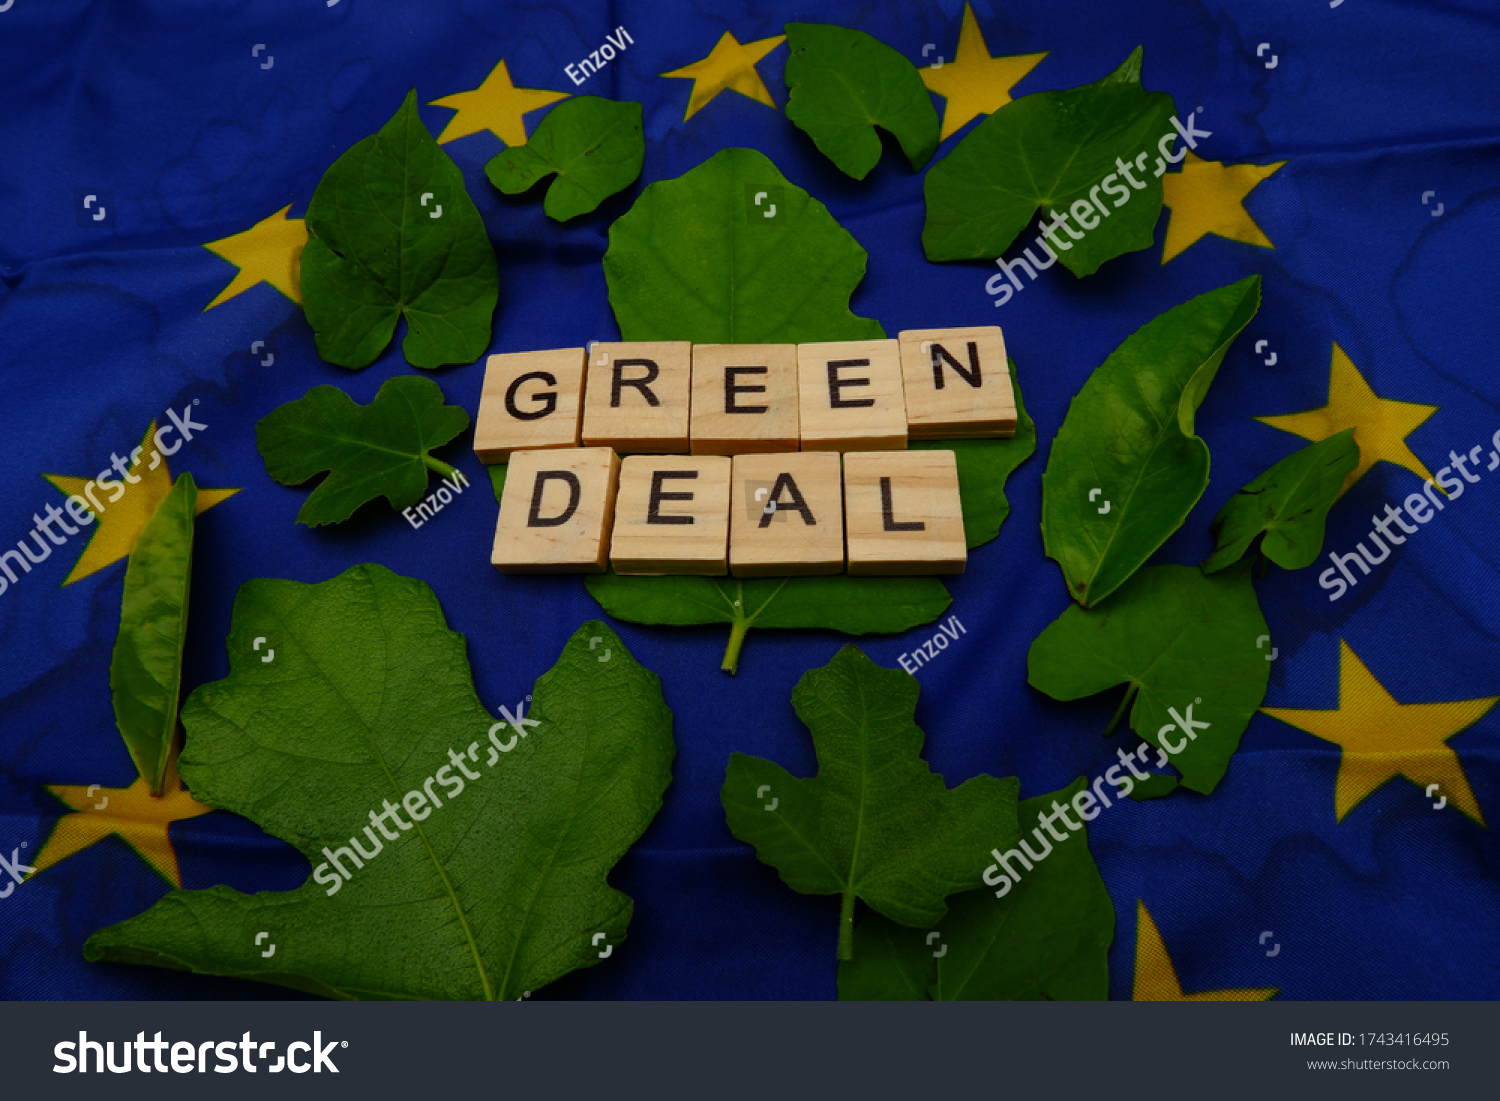 Some leaves,with a wooden inscription,green deal,above a European flag. Concept of fighting climate change on earth  #1743416495